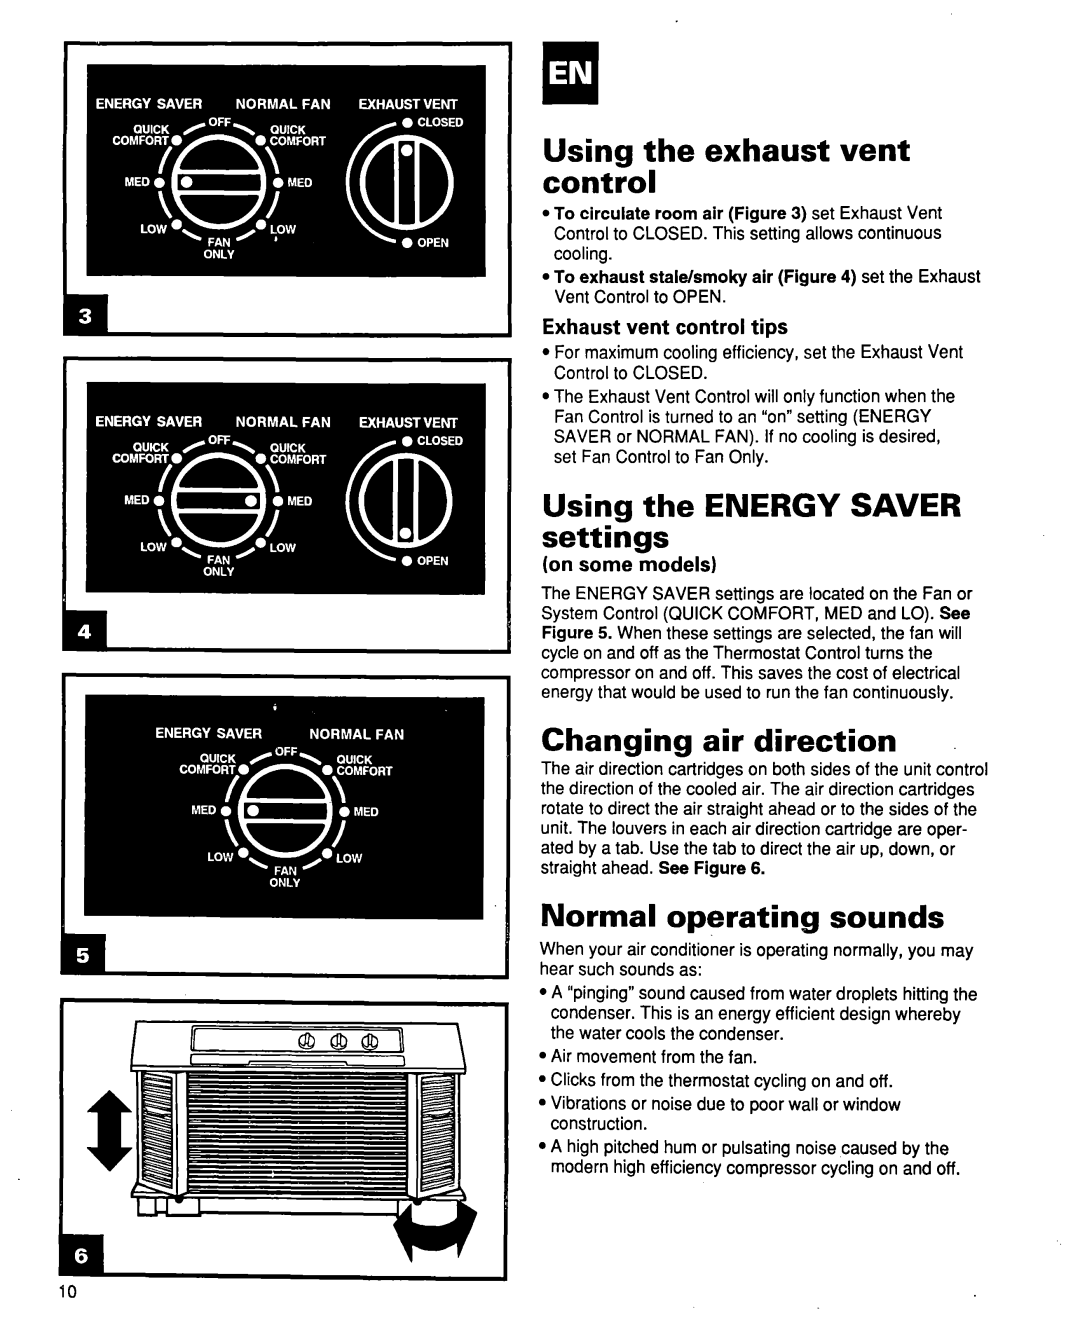 Whirlpool ACQ254XF0 manual Using the exhaust vent control, Using the ENERGY SAVER settings, Changing air direction 